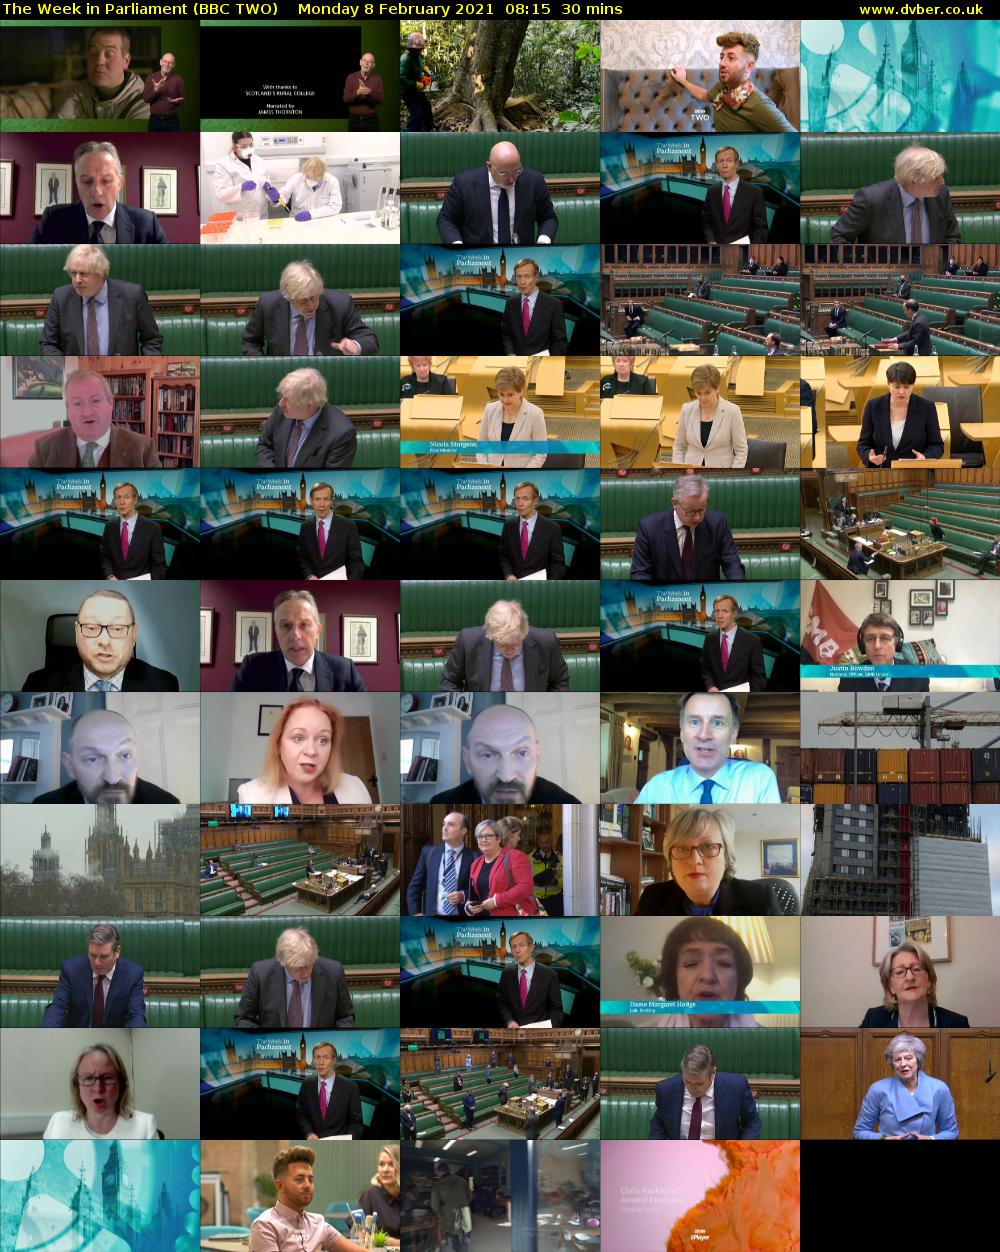 The Week in Parliament (BBC TWO) Monday 8 February 2021 08:15 - 08:45